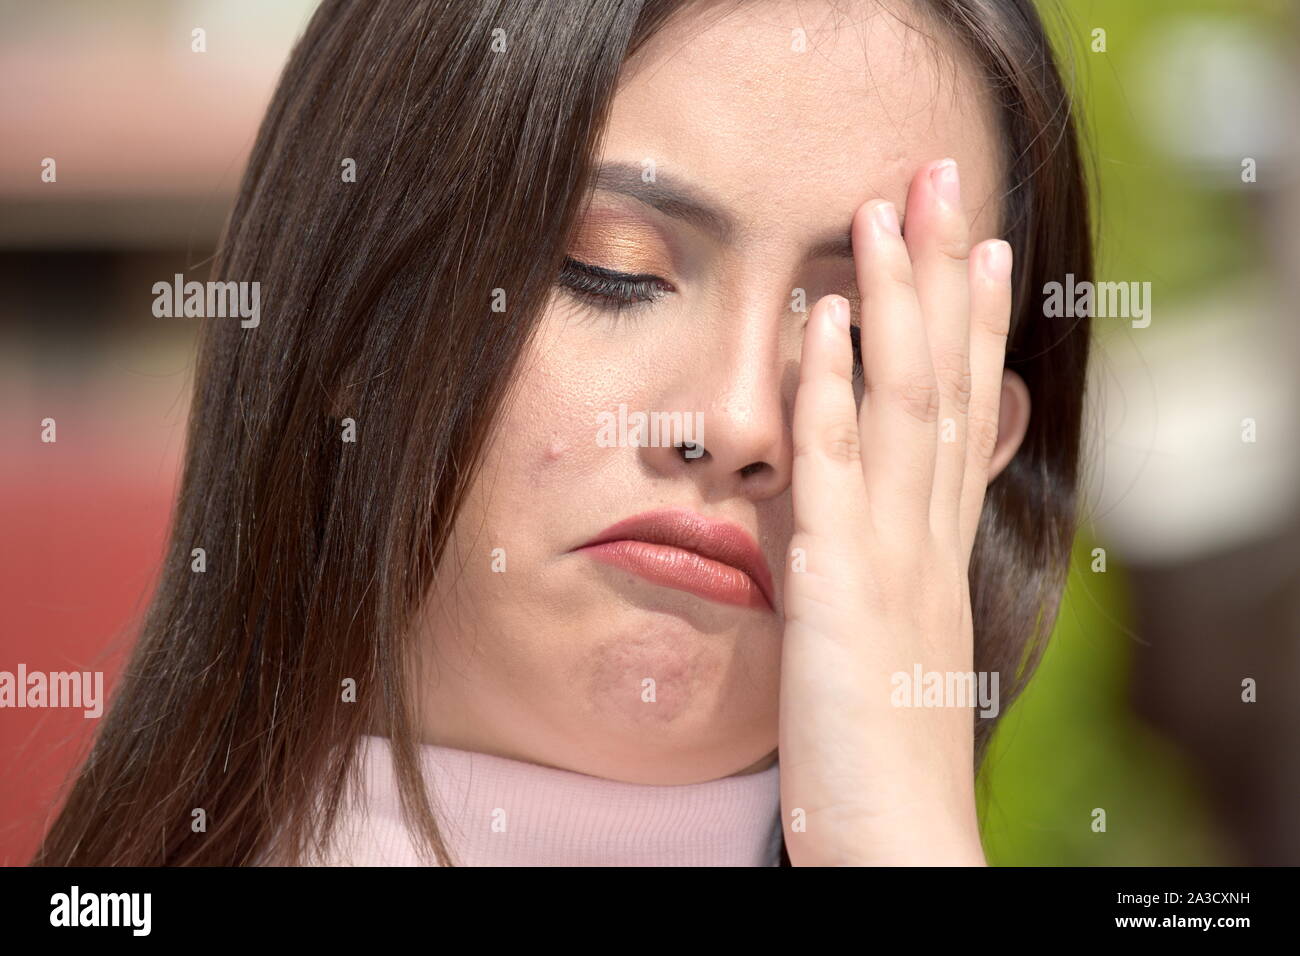 An A Crying Young Female Stock Photo